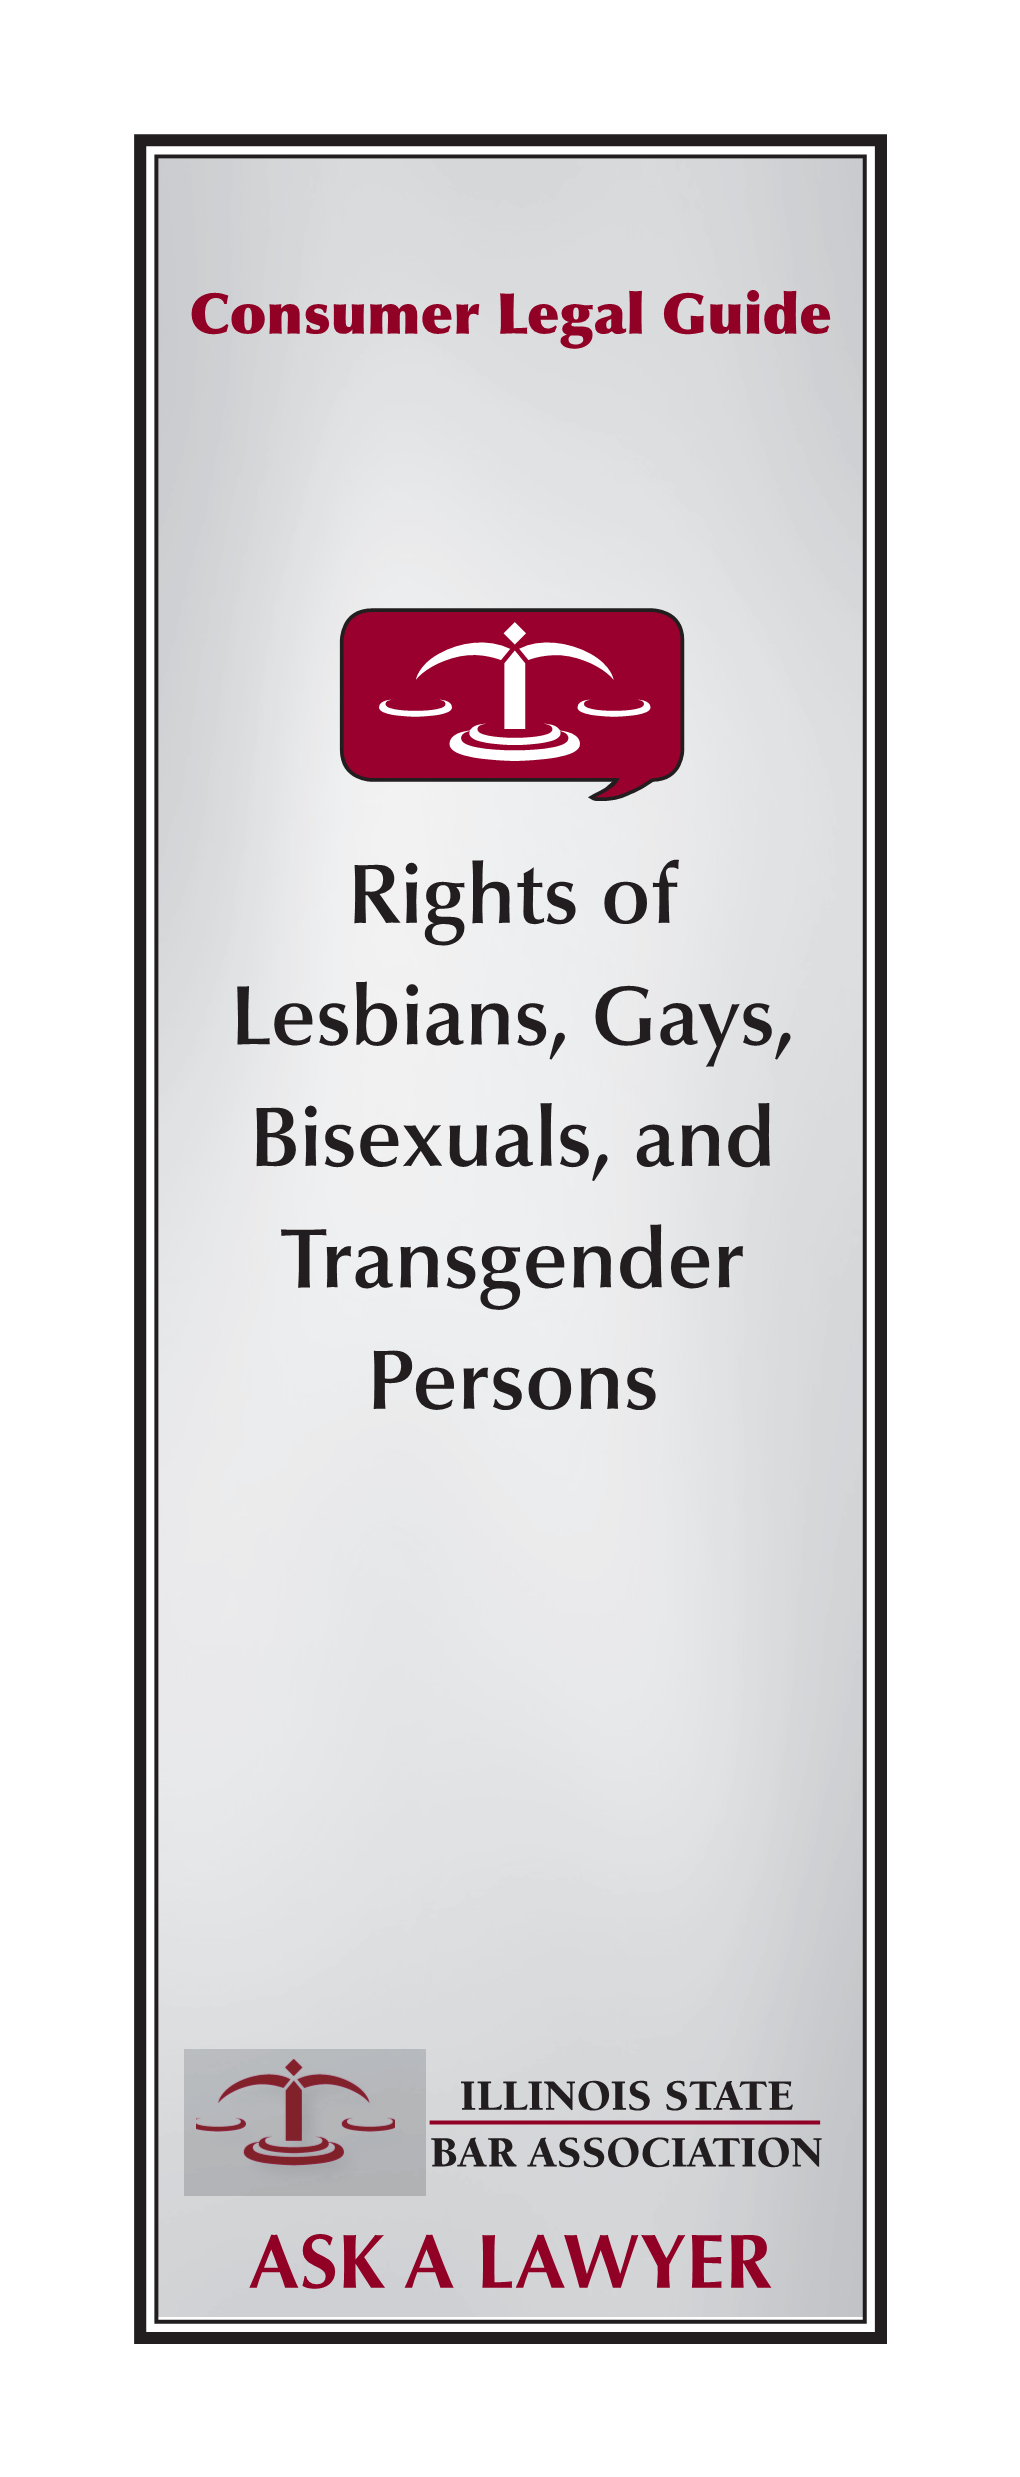 Rights of Lesbians, Gays, Bisexuals, and Transgender Persons